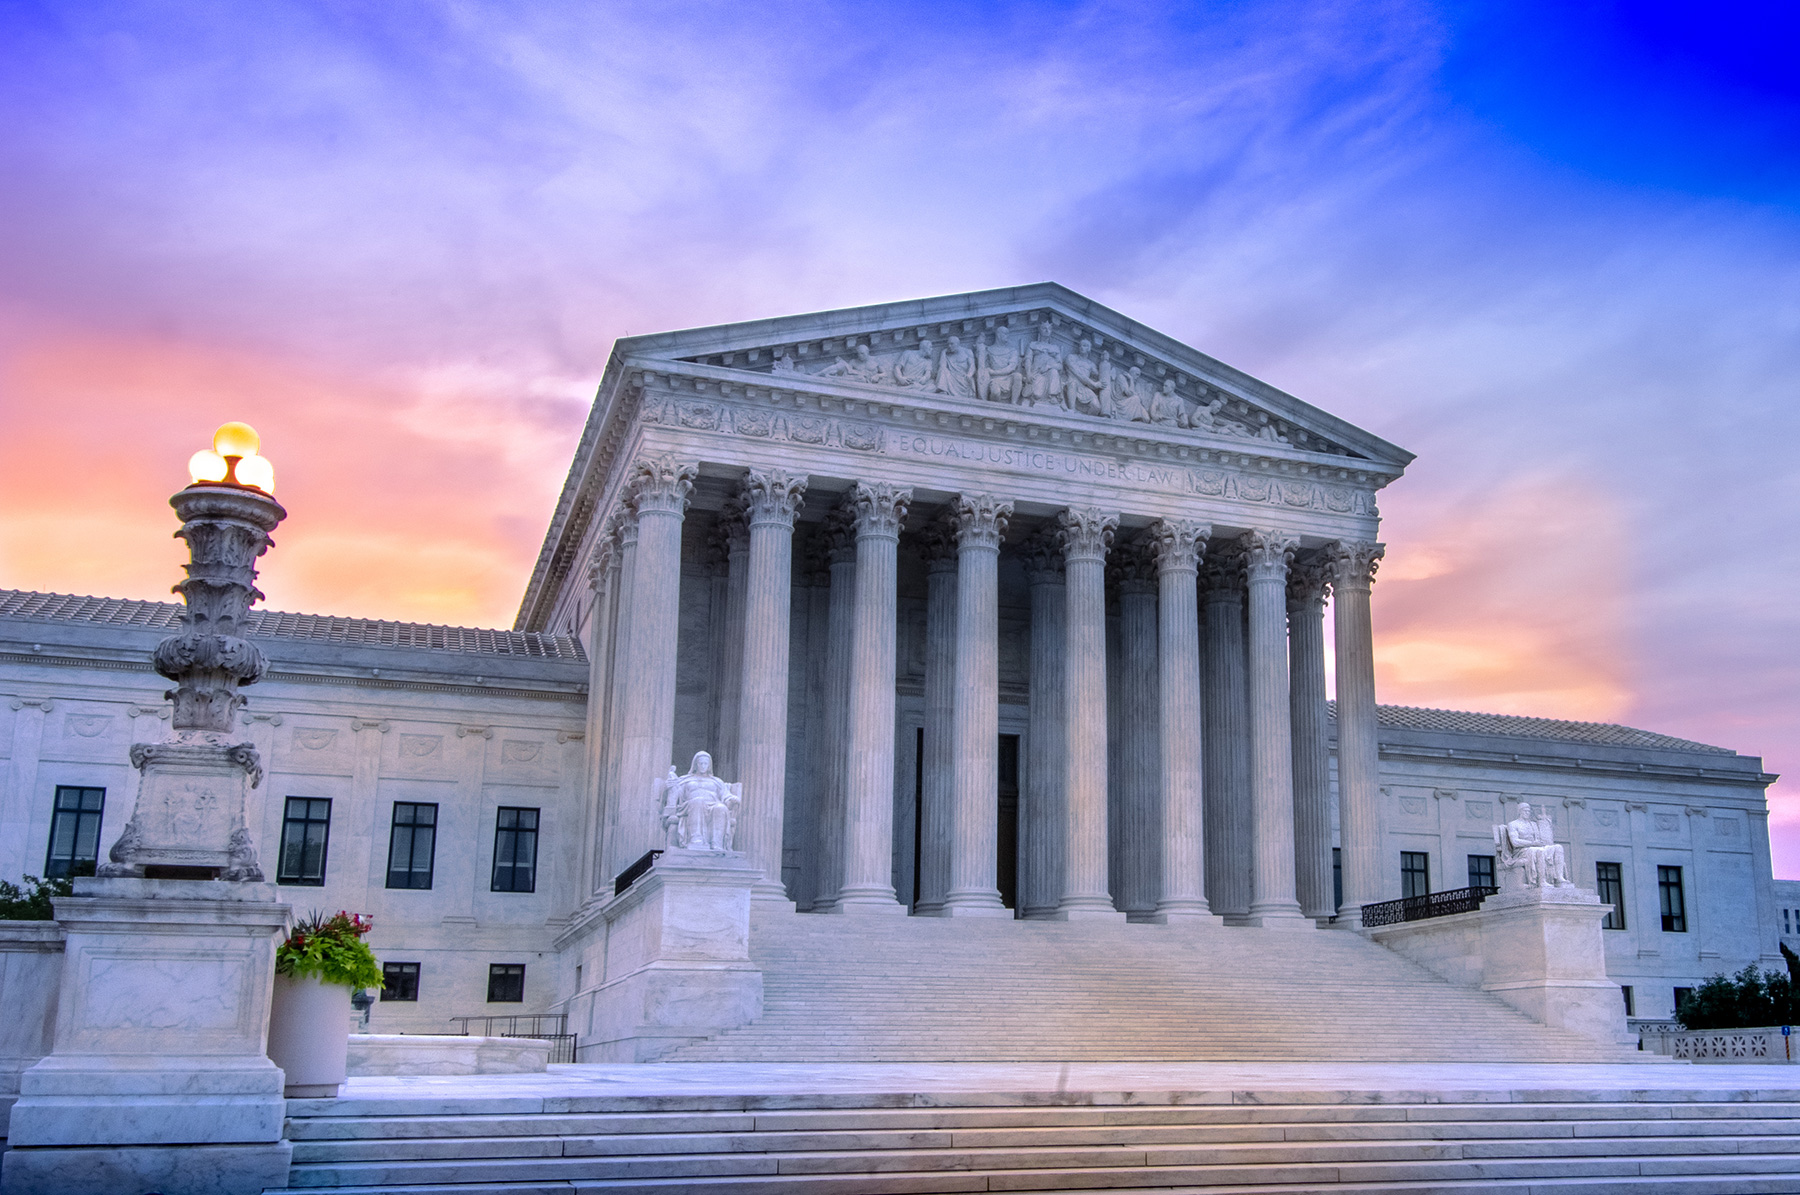 View of marble columns and greek classical architecture of the United States Supreme Court building with sunrise in background.